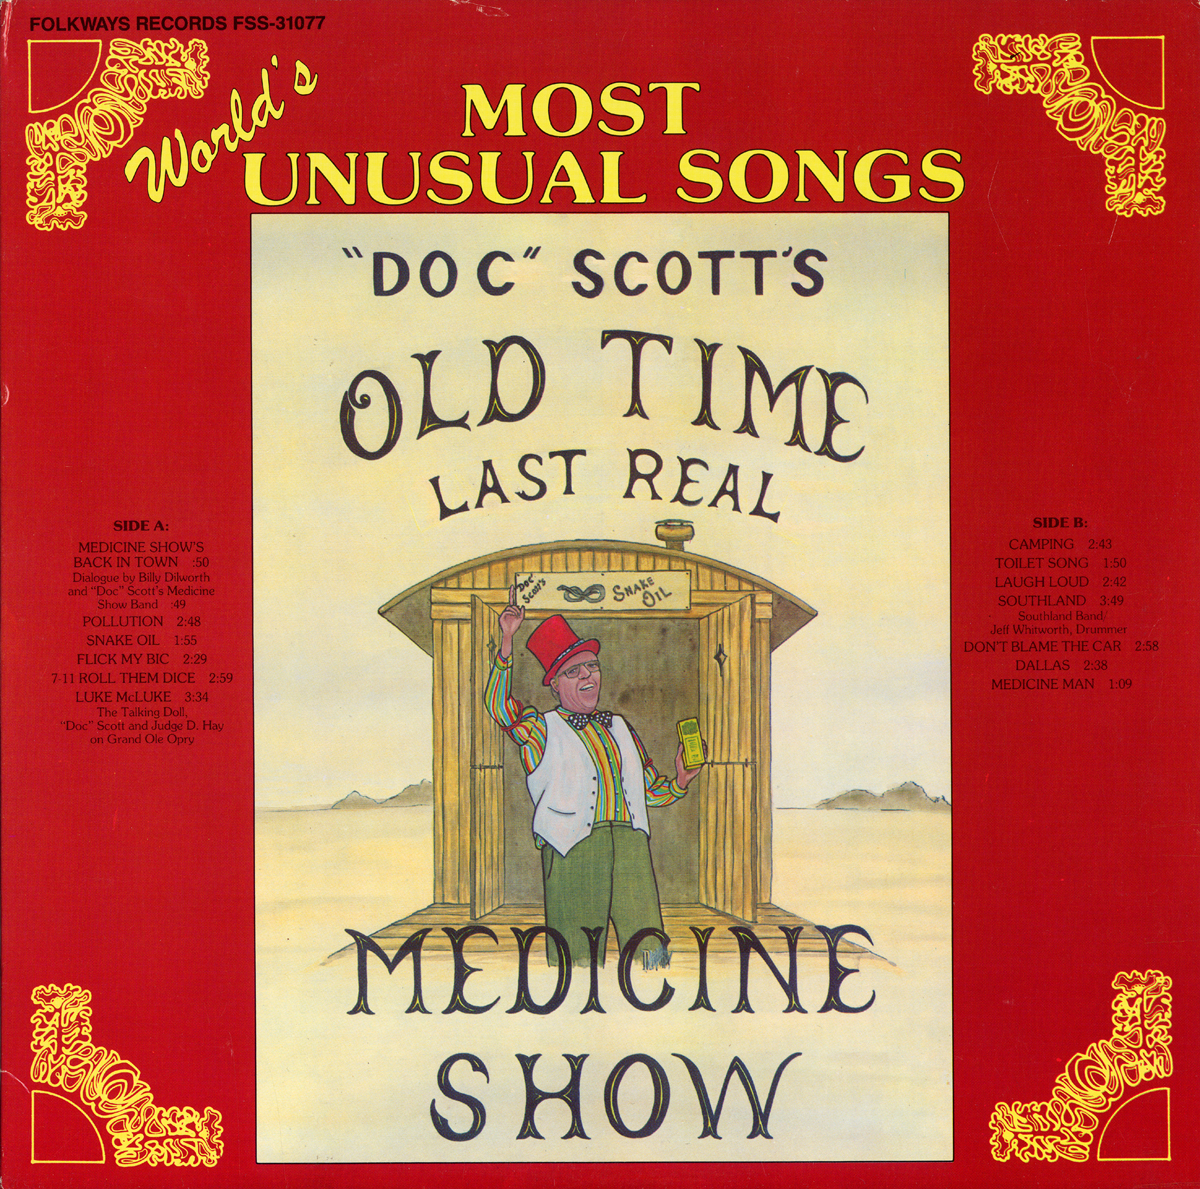 DOC TOMMY SCOTT'S LAST REAL MEDICINE SHOW